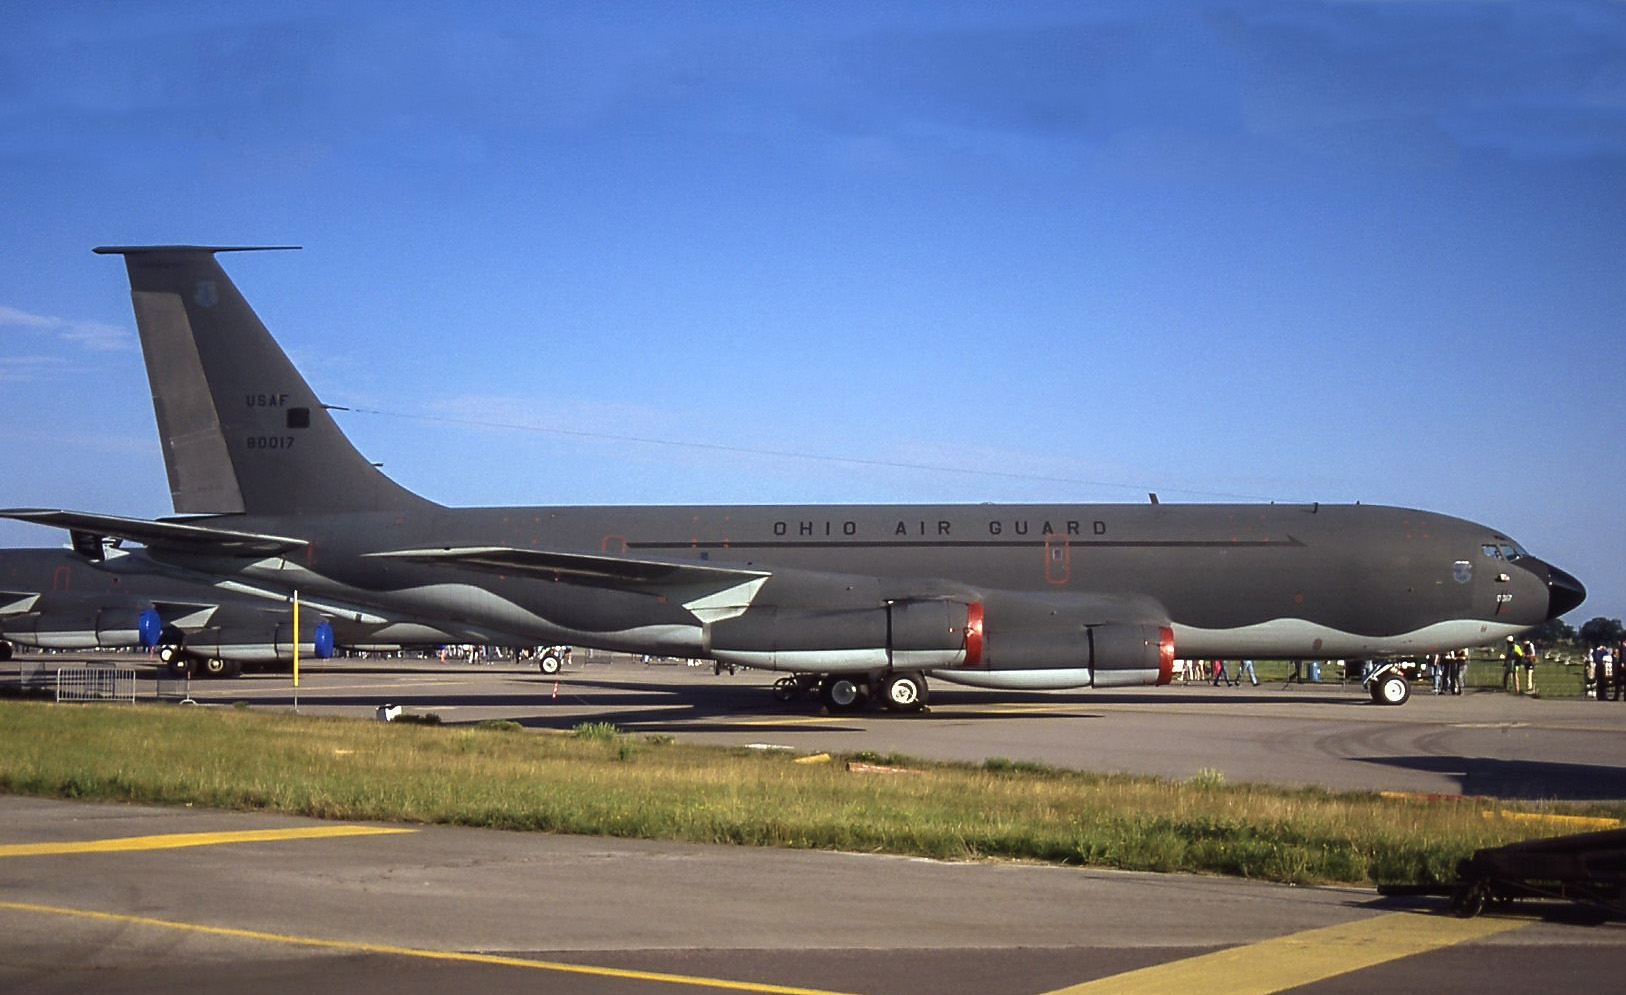 58-0017/580017 Withdrawn from use Boeing C-135 Stratotanker Airframe Information - AVSpotters.com